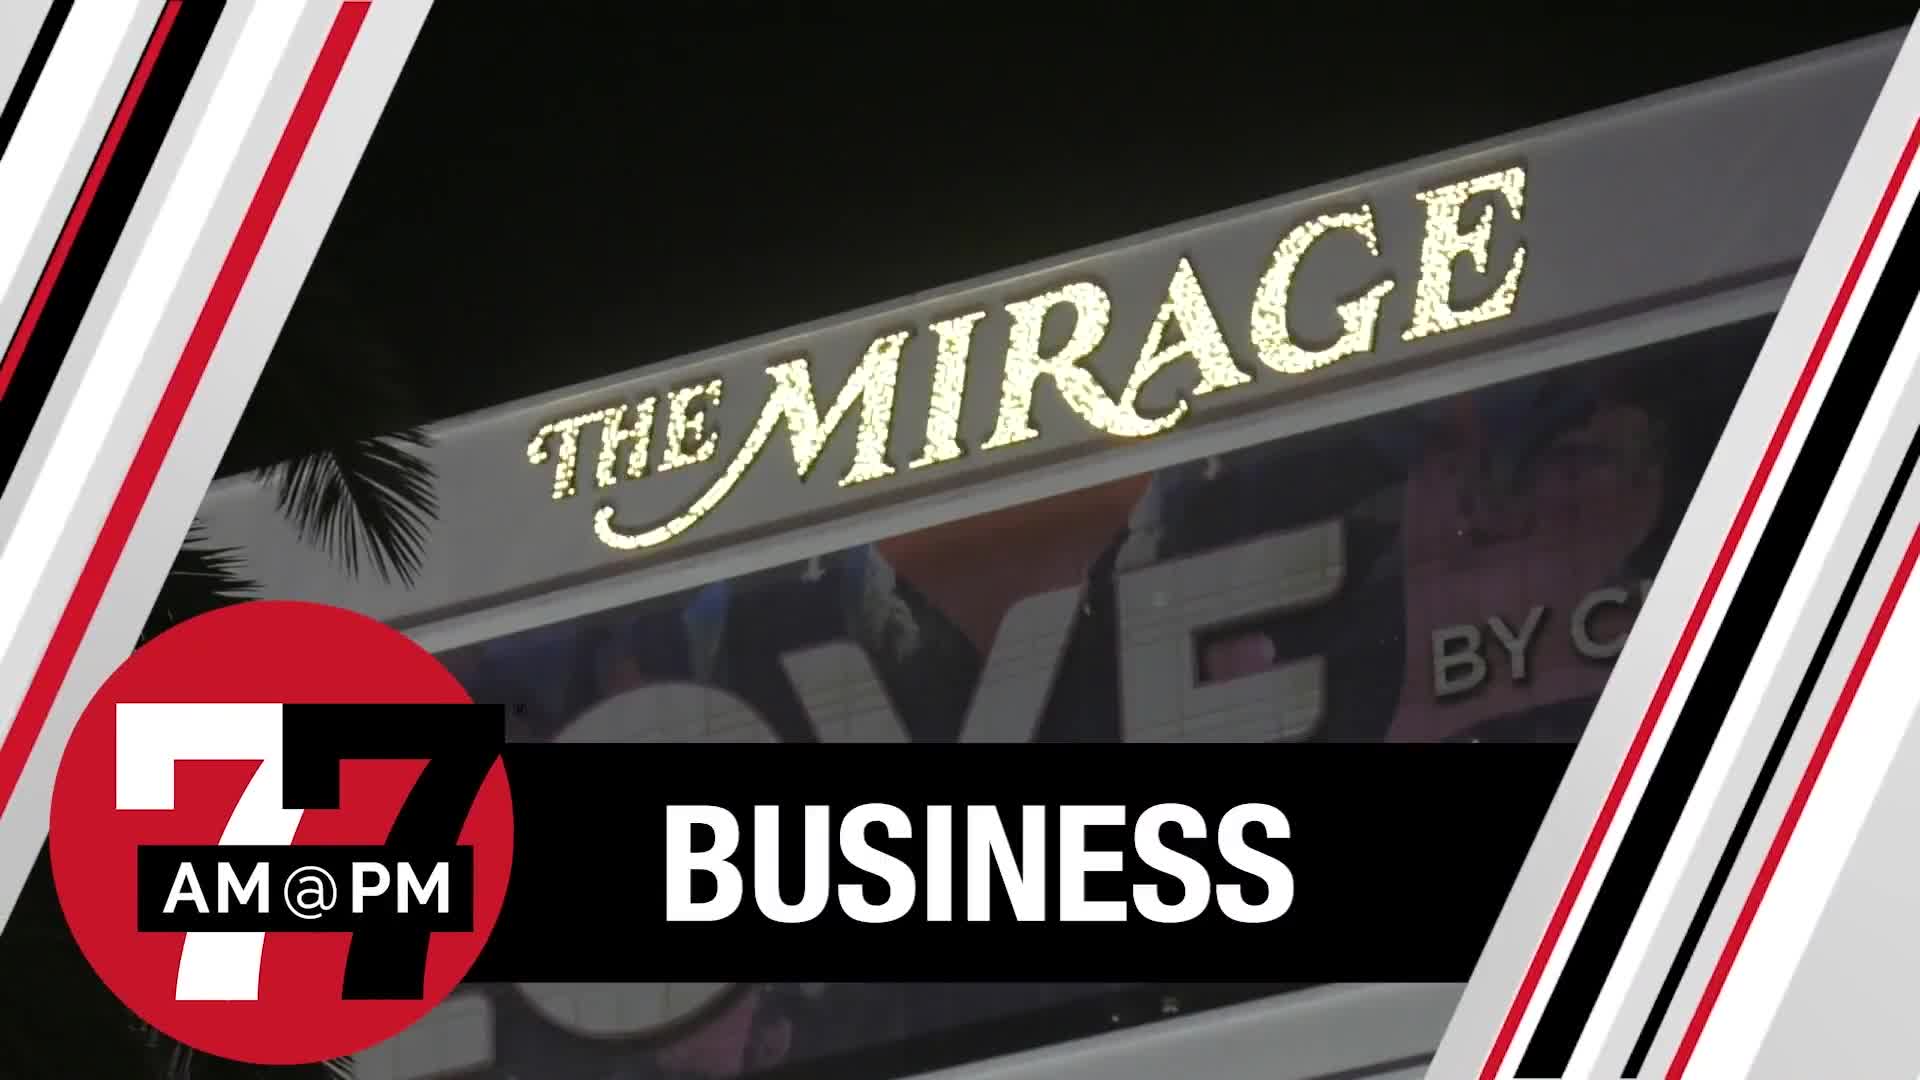 Program will help mirage employees when casino closes